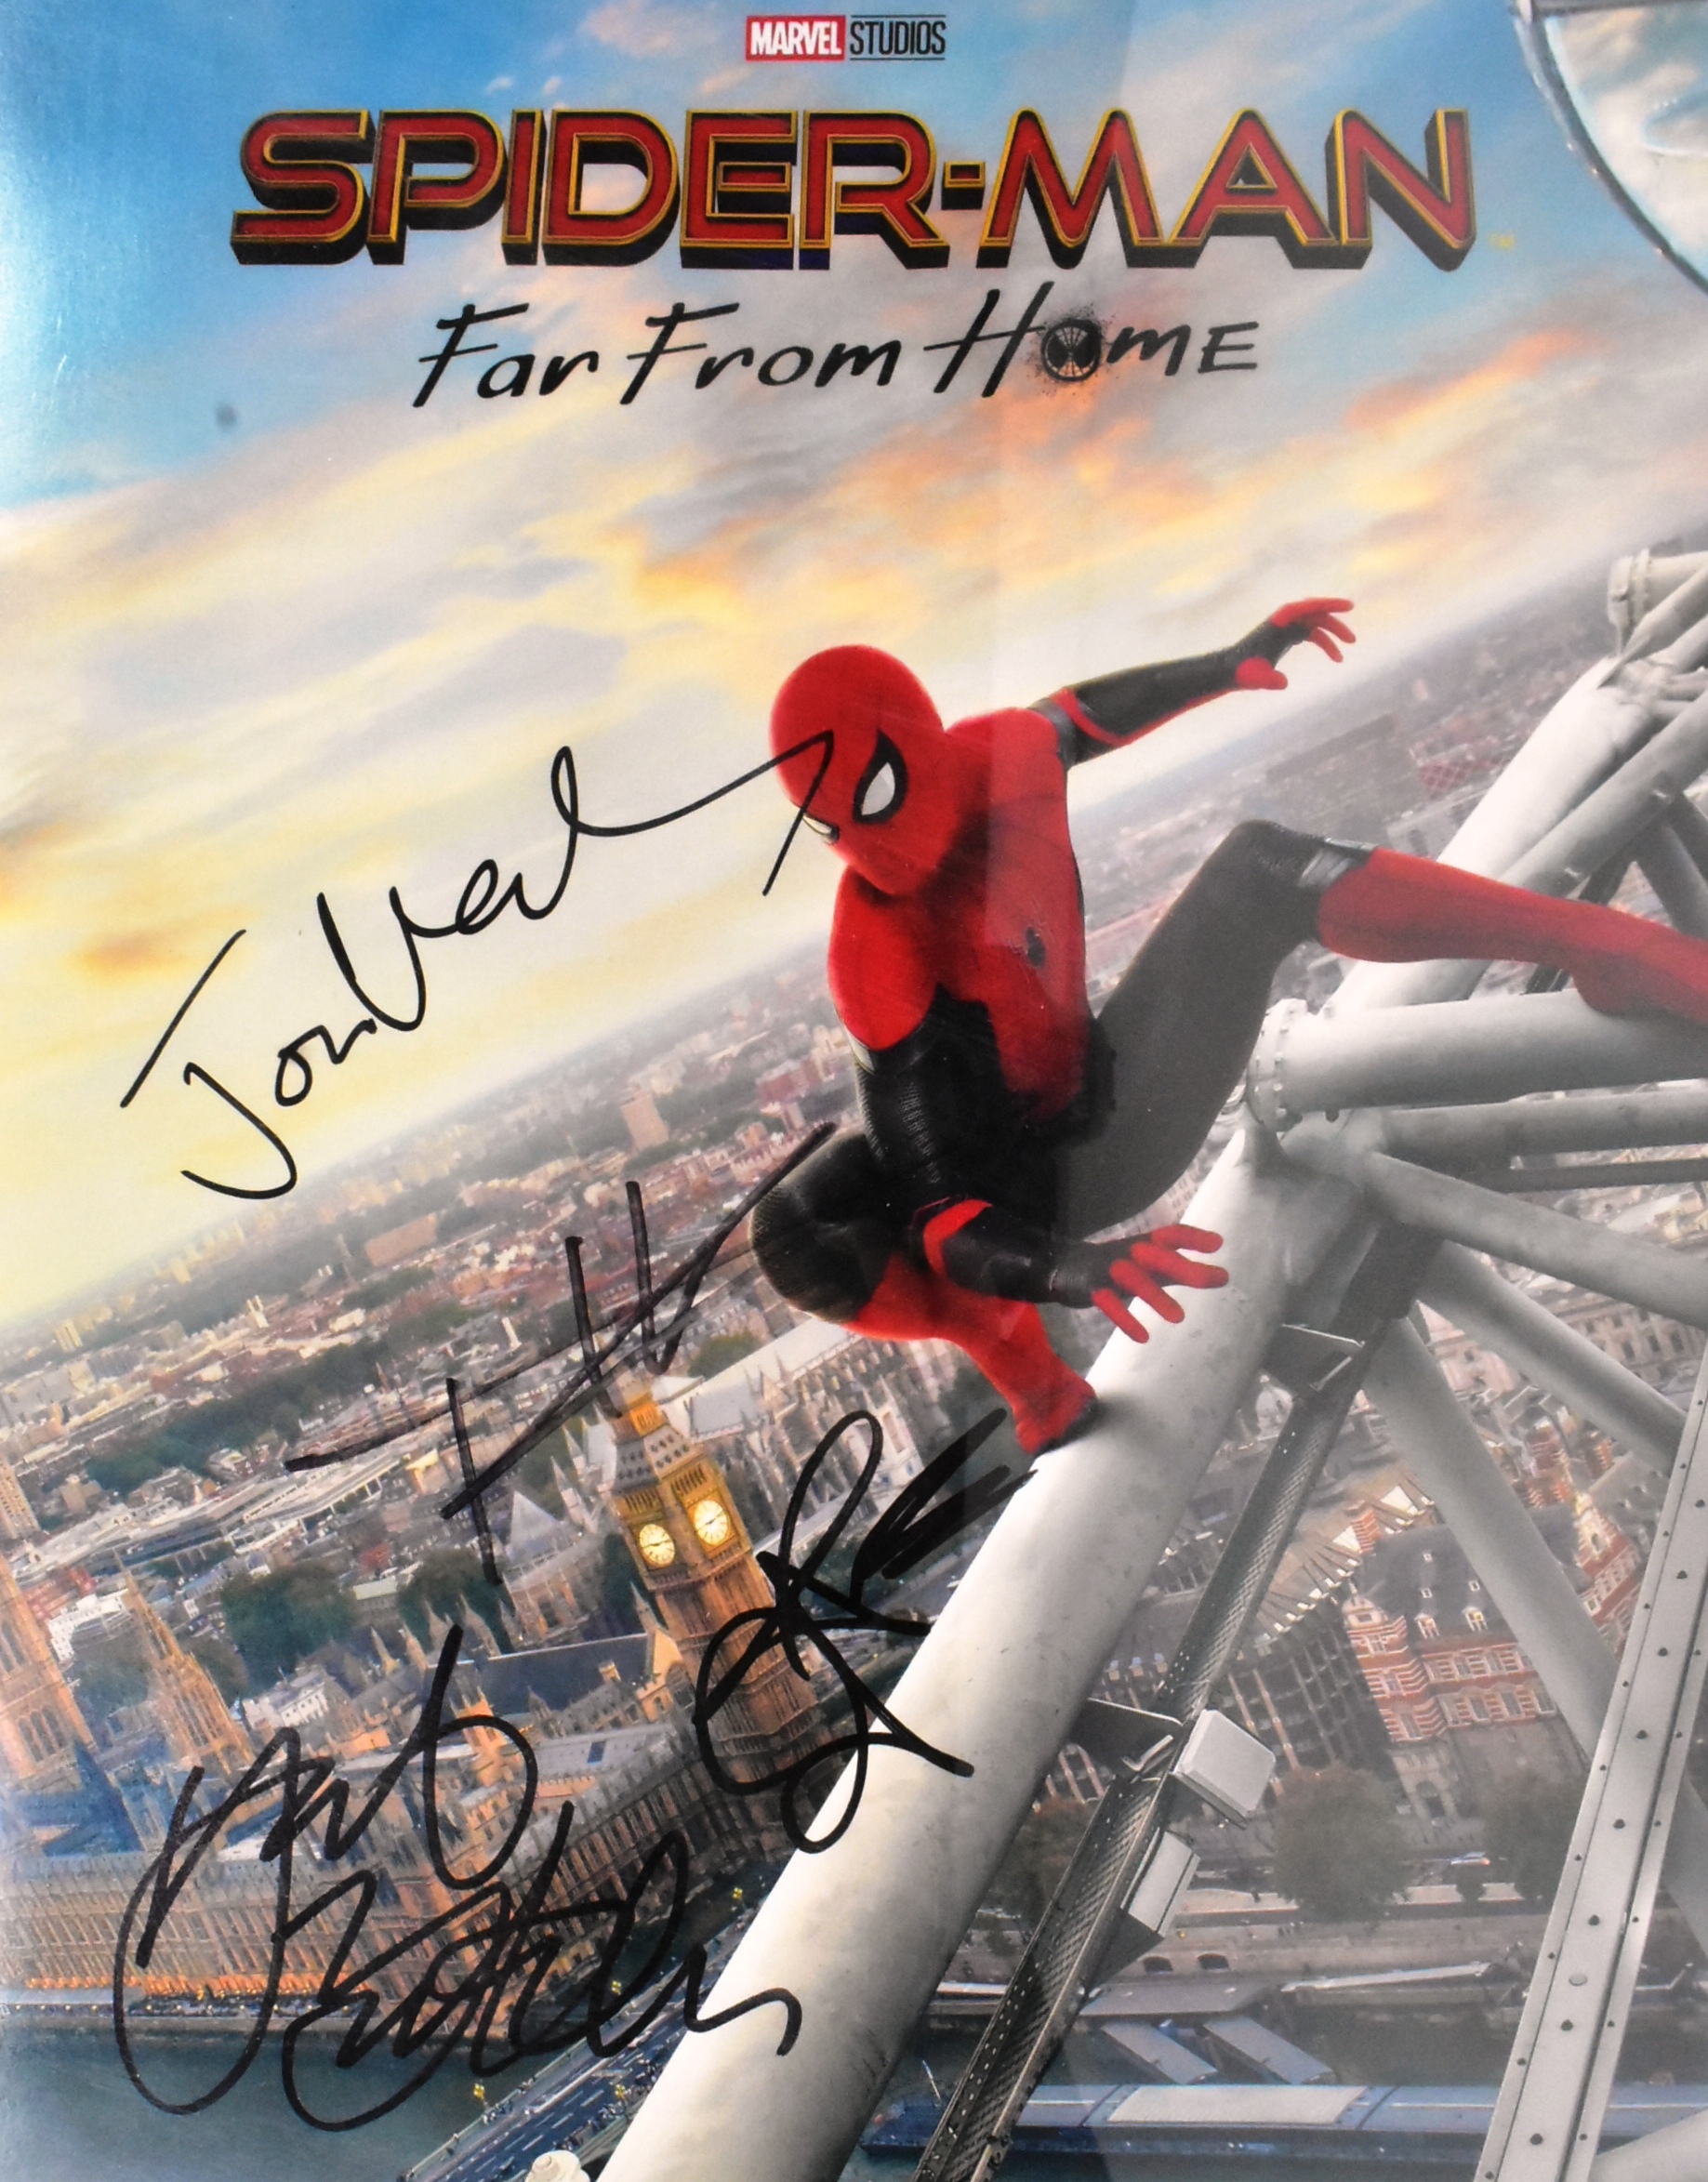 MARVEL - SPIDER-MAN FAR FROM HOME - CAST AUTOGRAPHED PHOTO - AFTAL - Image 2 of 5